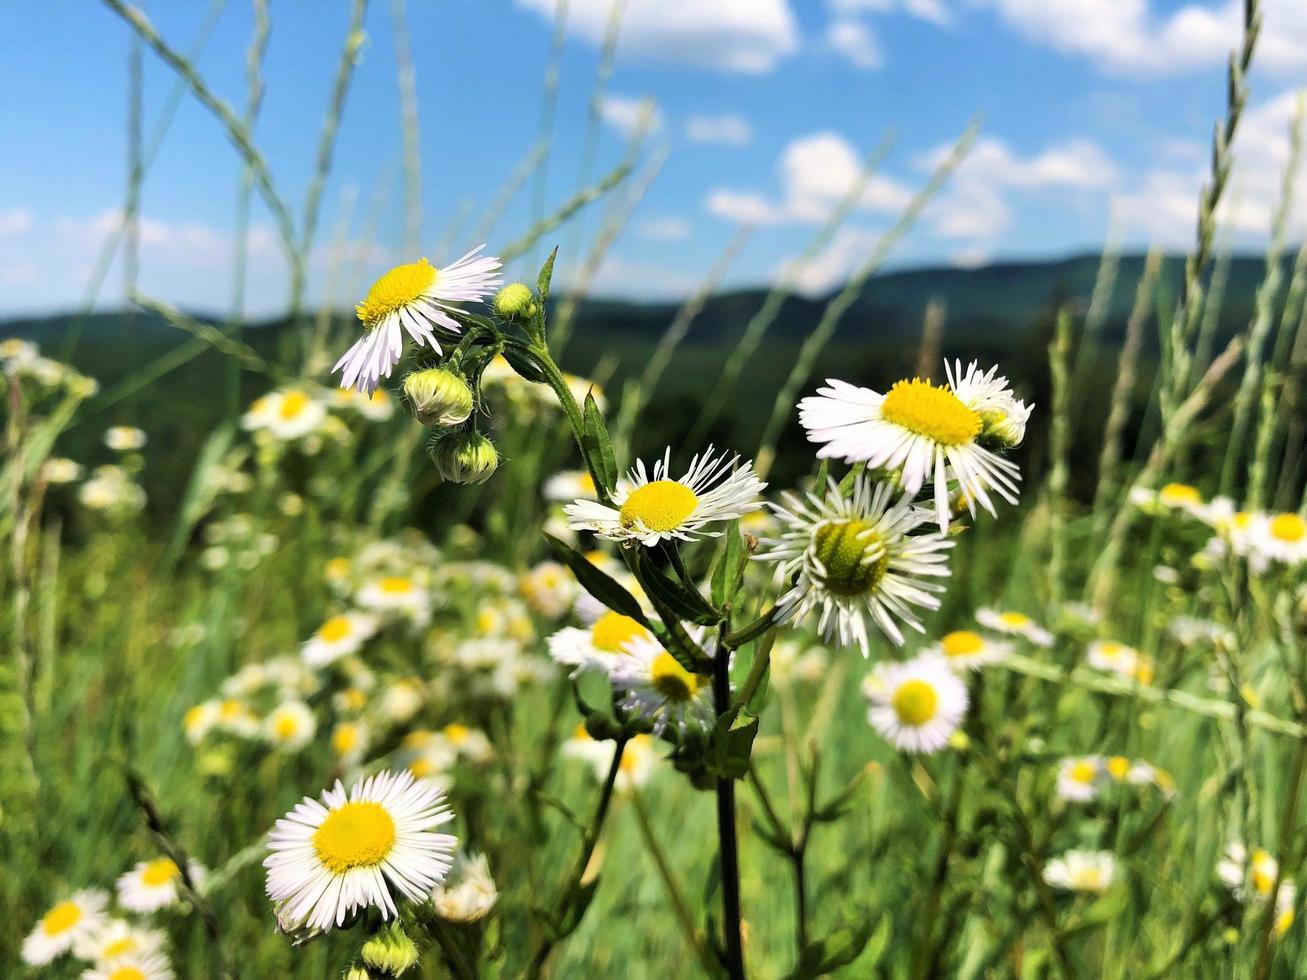 A camomile in the field photo